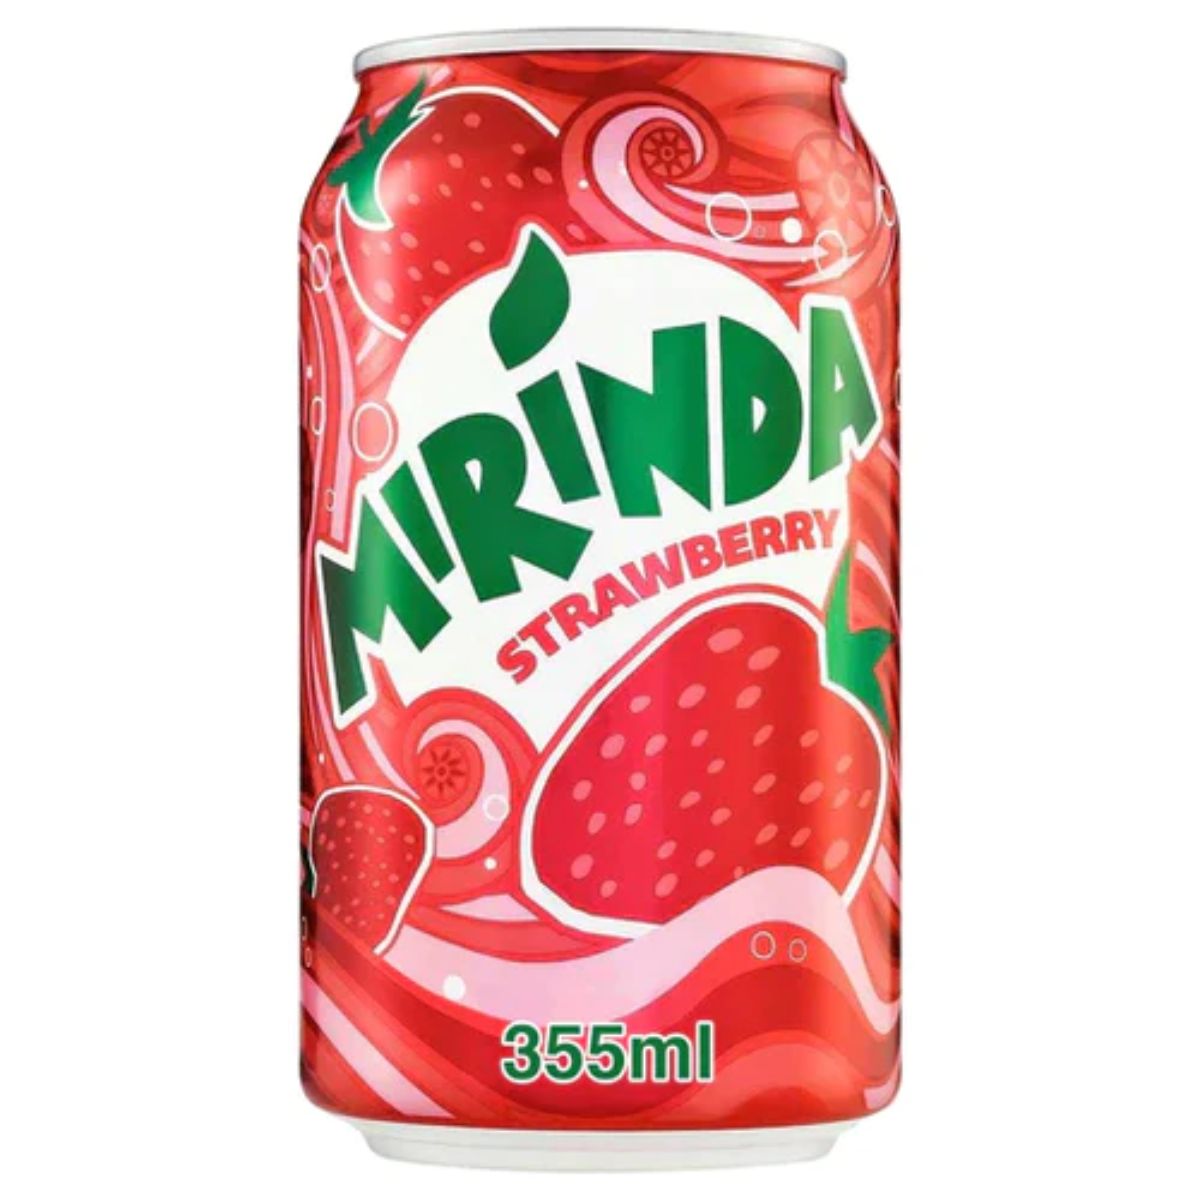 A can of Mirinda - Strawberry Soda - 330ml on a white background.